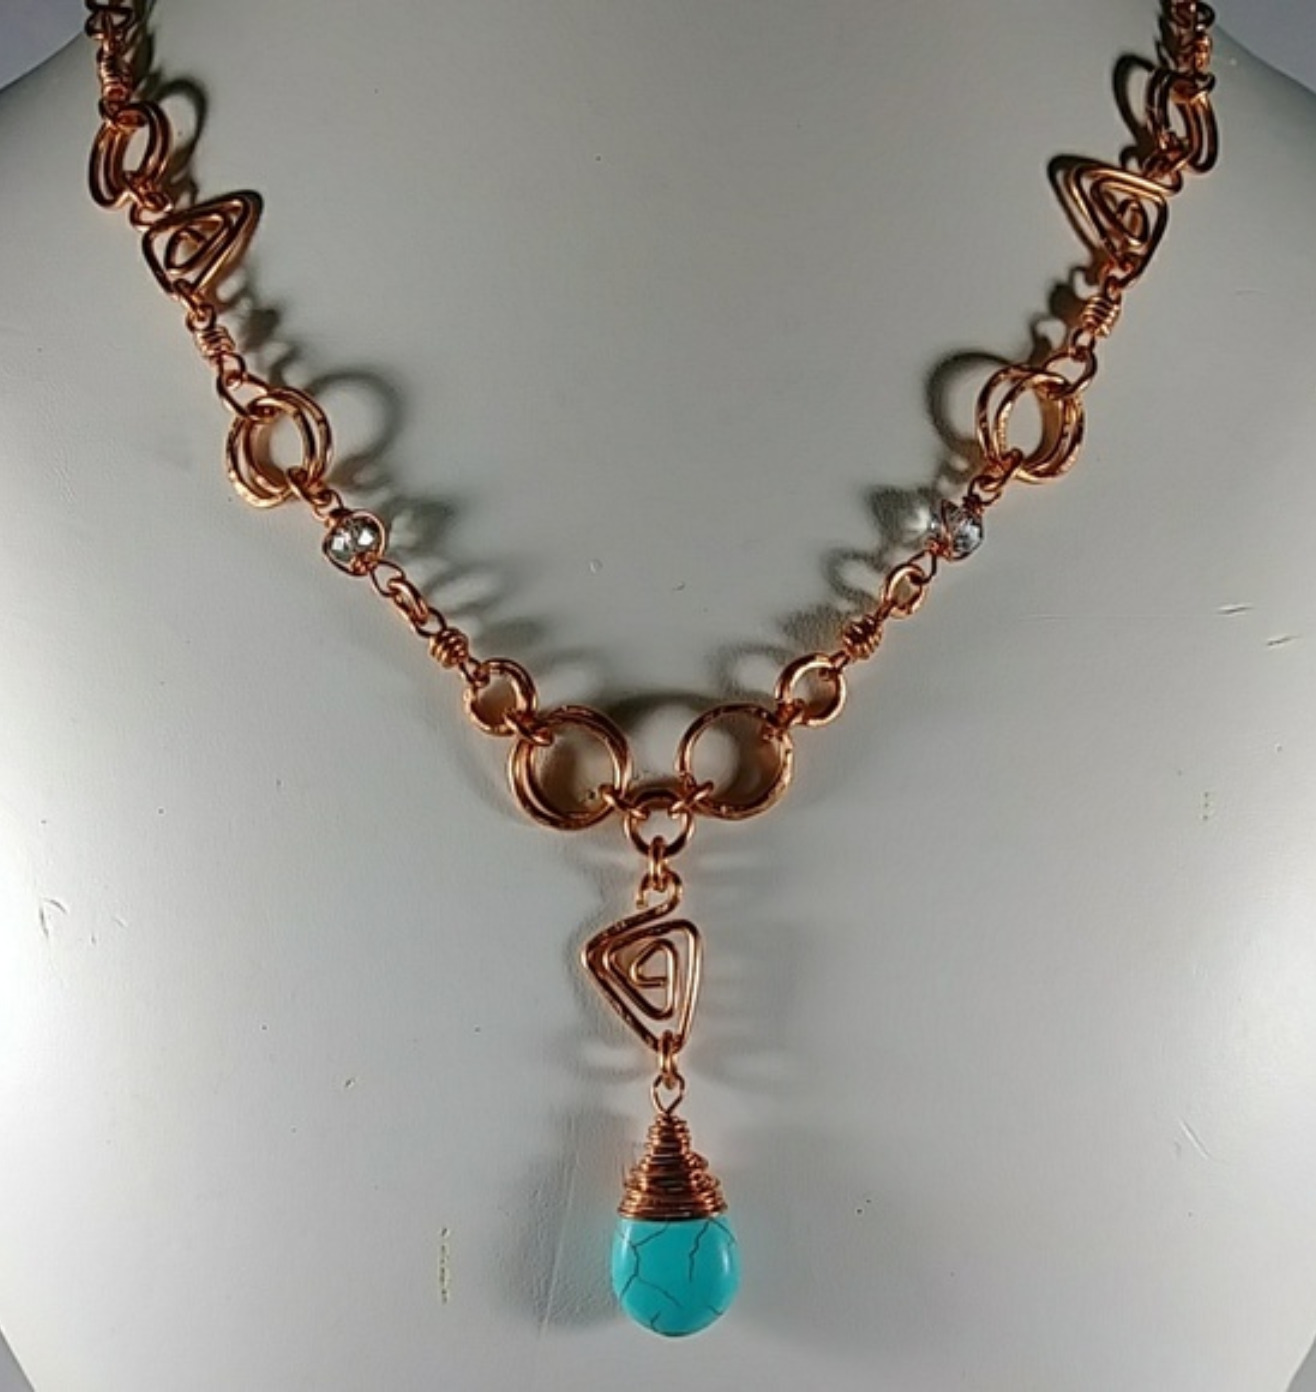 (305-NCK) - Description: Copper Wire, Beads, Turquoise Howlite (Gemstones) , Faceted Glass Beads, Hook Closure - Dimension: 24 Inches (L)